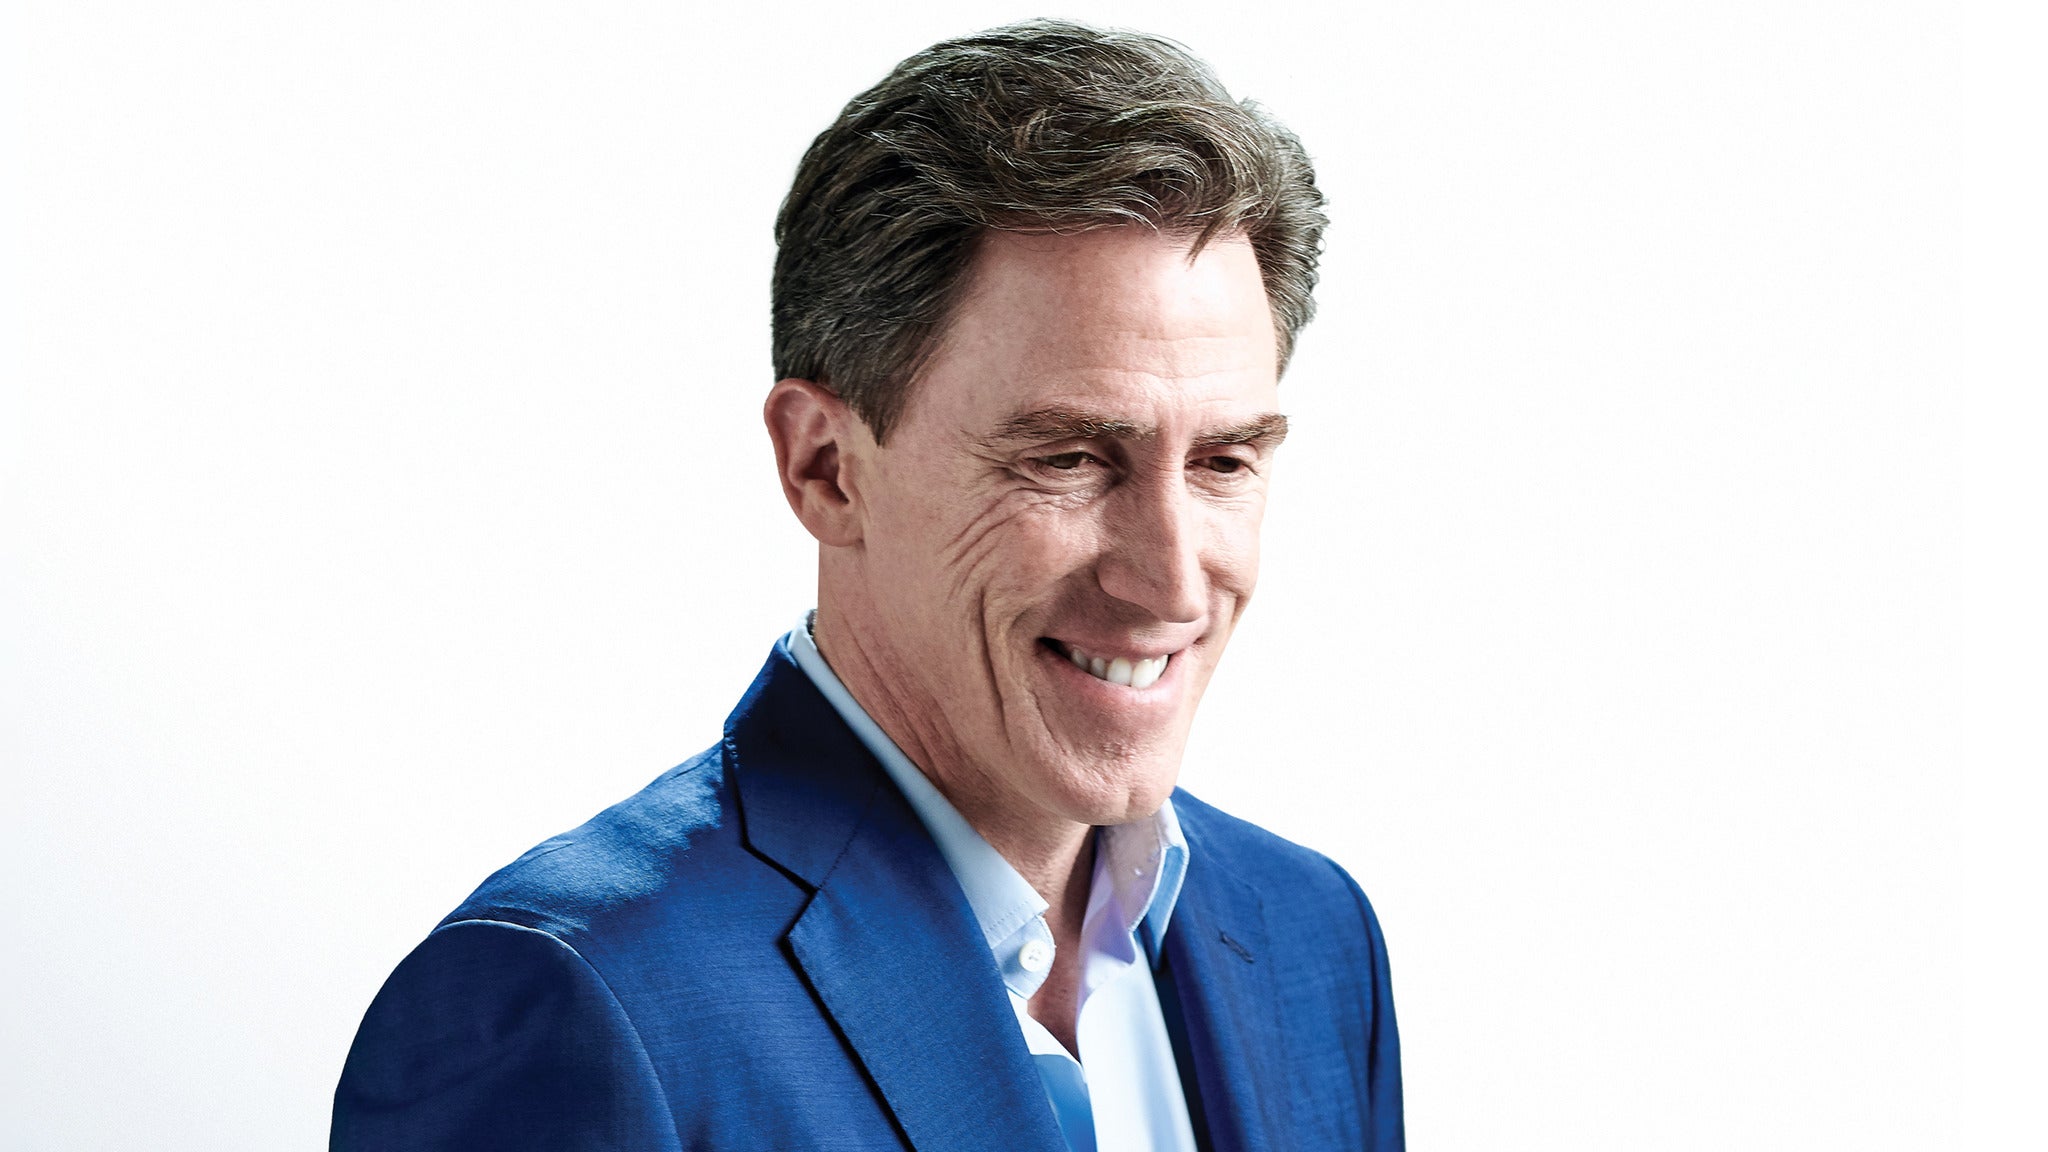 Image used with permission from Ticketmaster | Rob Brydon tickets